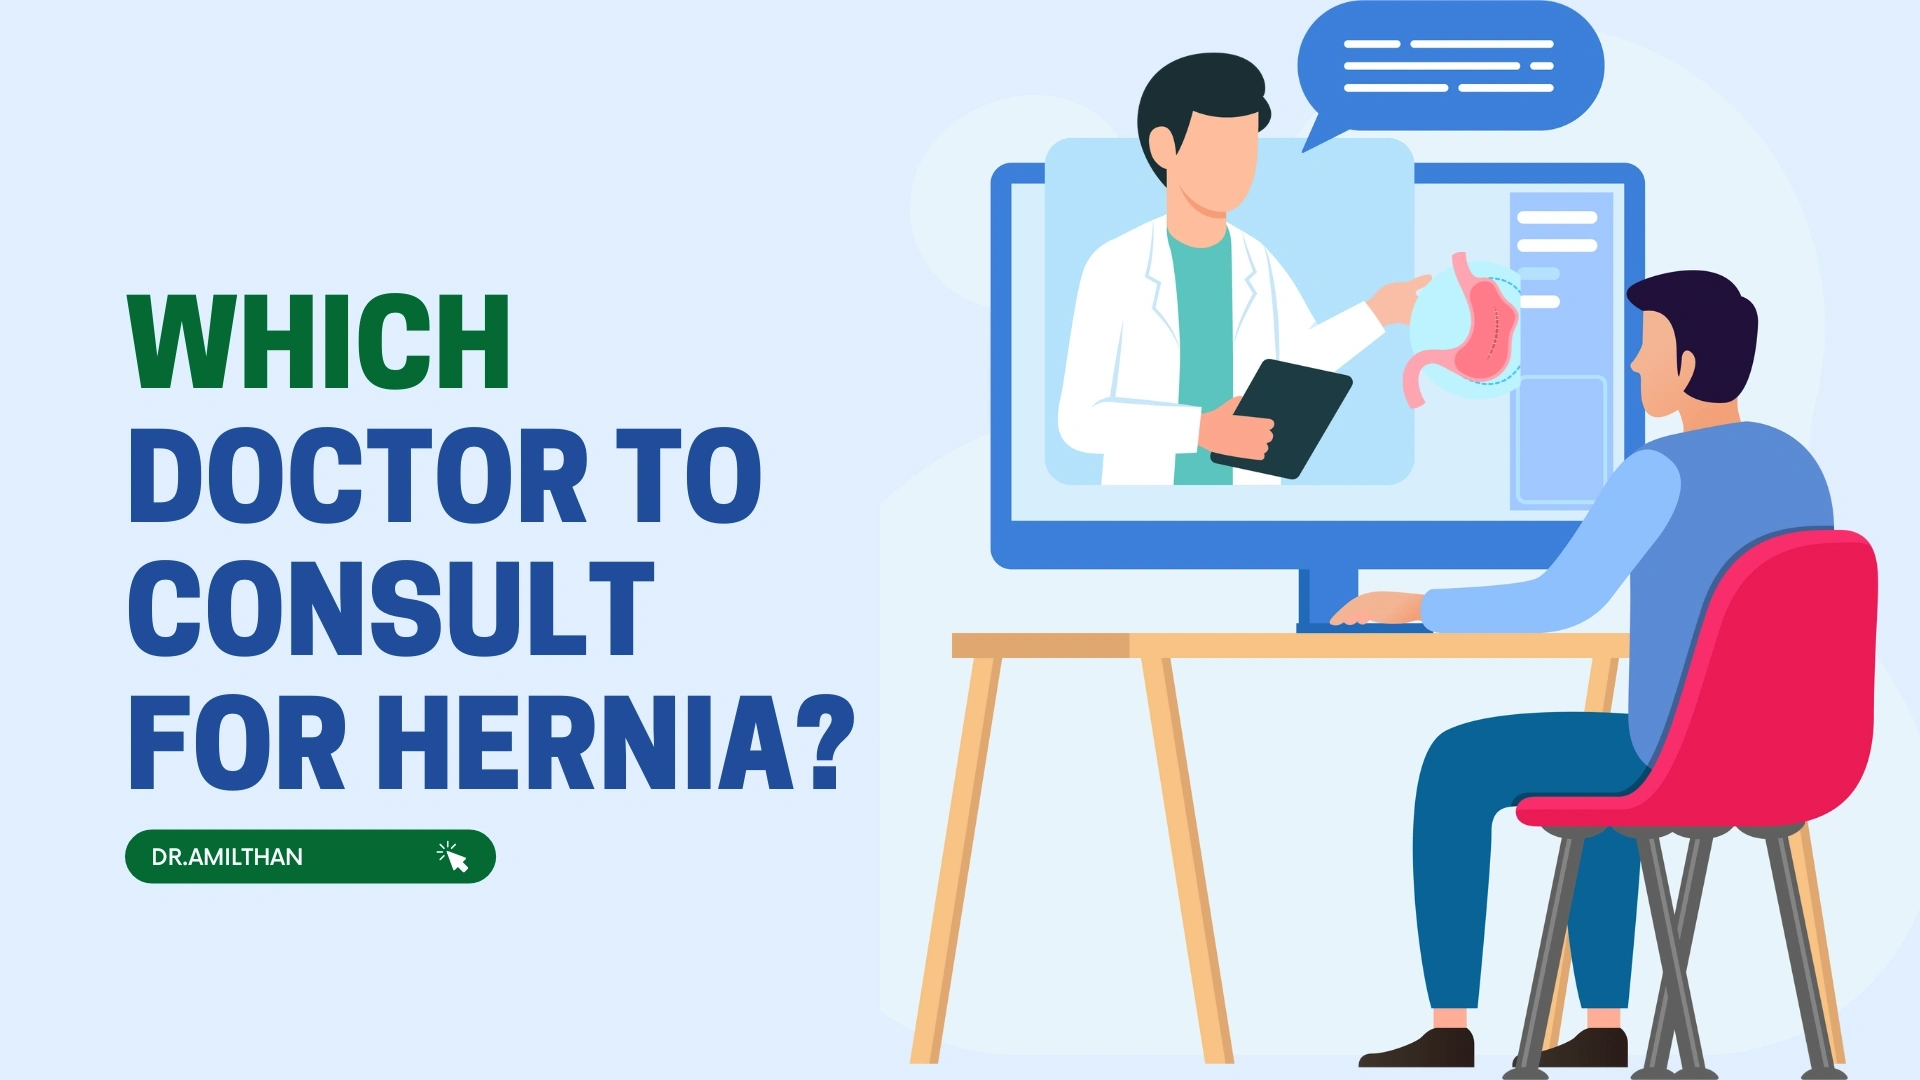 Which Doctor to consult for Hernia?